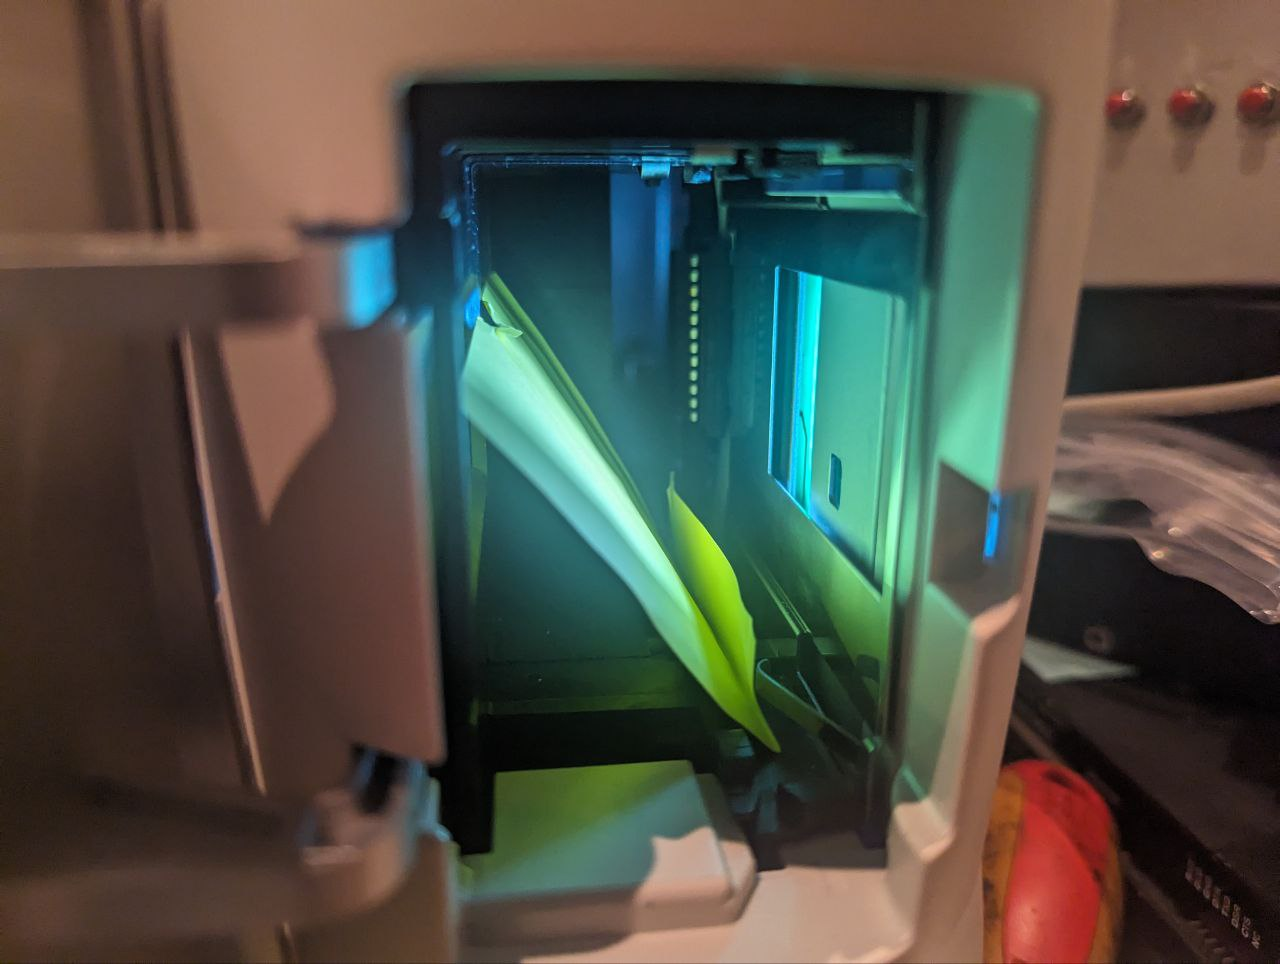 The door of the scanner open with a post-it note where the slide goes in